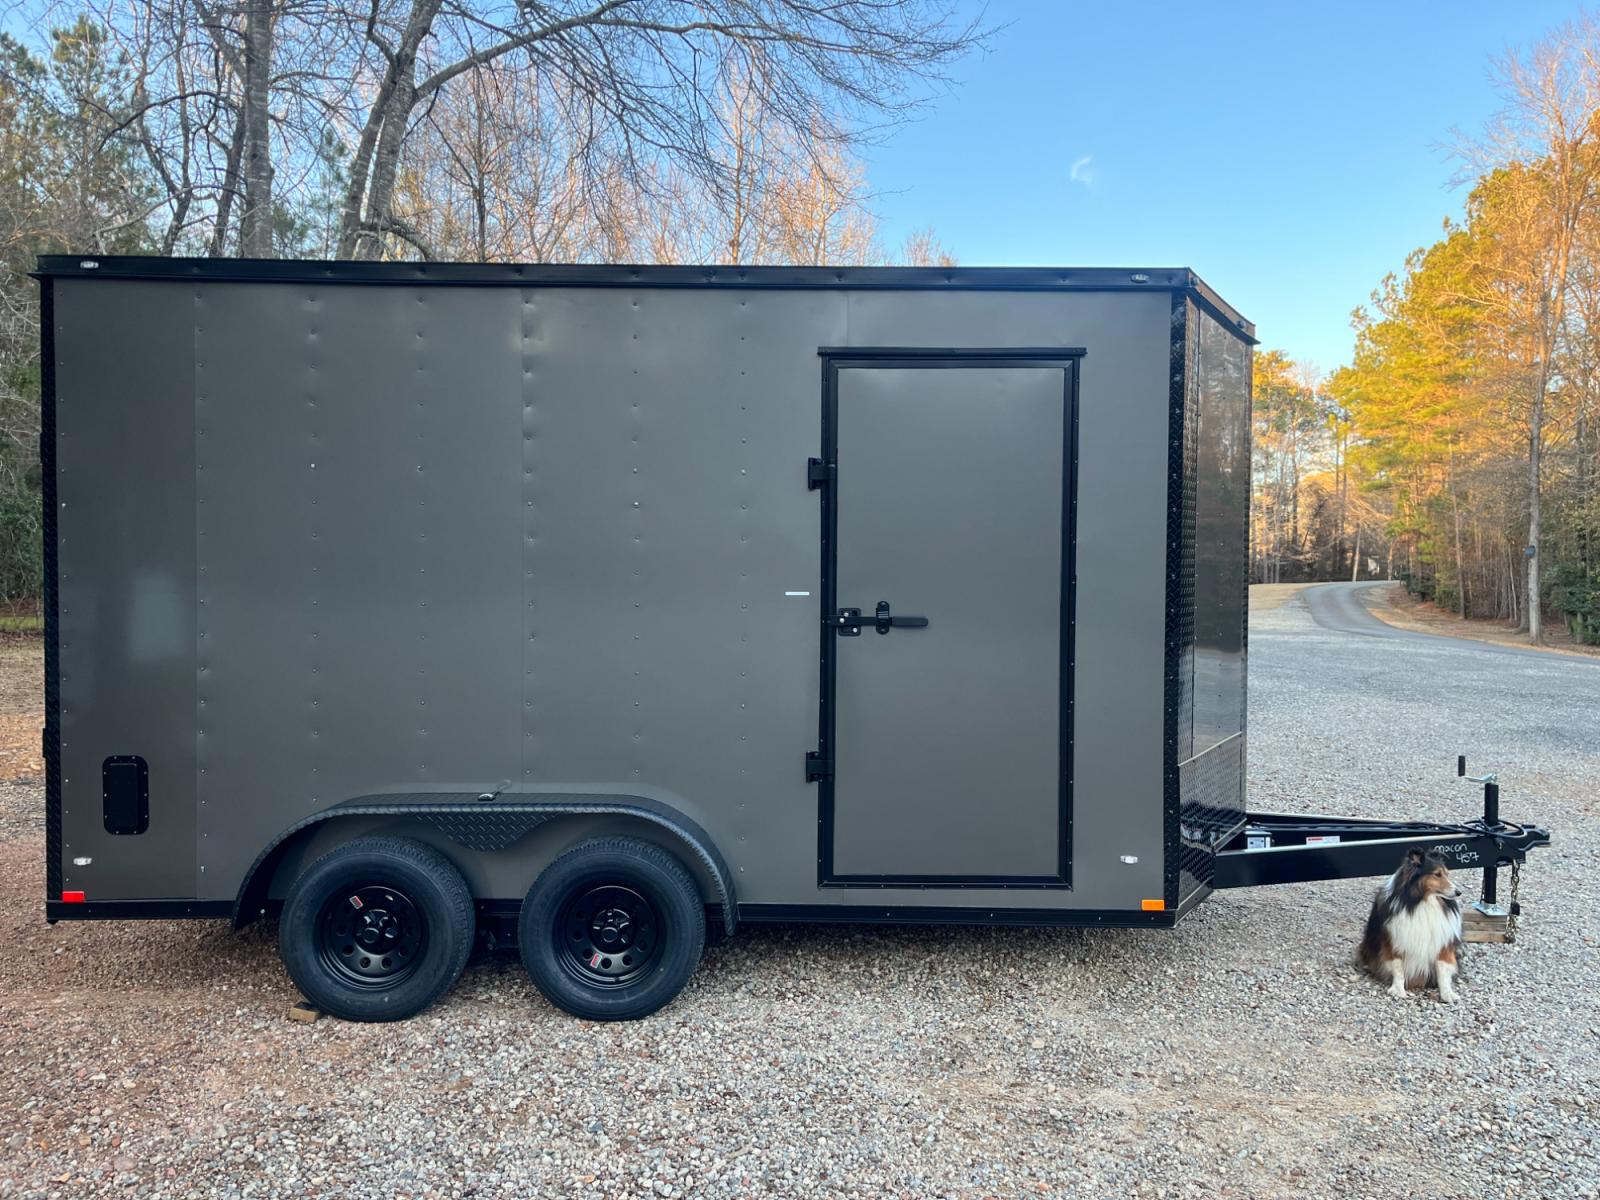 2023 .080 Charcoal Metallic w/Black Out Pkg. Elite Cargo 7ft X 14ft Tandem , located at 1330 Rainey Rd., Macon, 31220, (478) 960-1044, 32.845638, -83.778687 - Brand New 2023 "Top of the Line" Elite Cargo Brand Trailer Made in South Ga. Awesome 7ft X 14ft Tandem Enclosed Cycle Hauler & Cargo Trailer! Taller Inside Height is 7ft 6" Tall Inside & Ramp Door Clearance is 7ft! .080 Thick Metallic Charcoal Aluminum Skin is Awesome! Black Out Pkg Trim, Wider - Photo #1